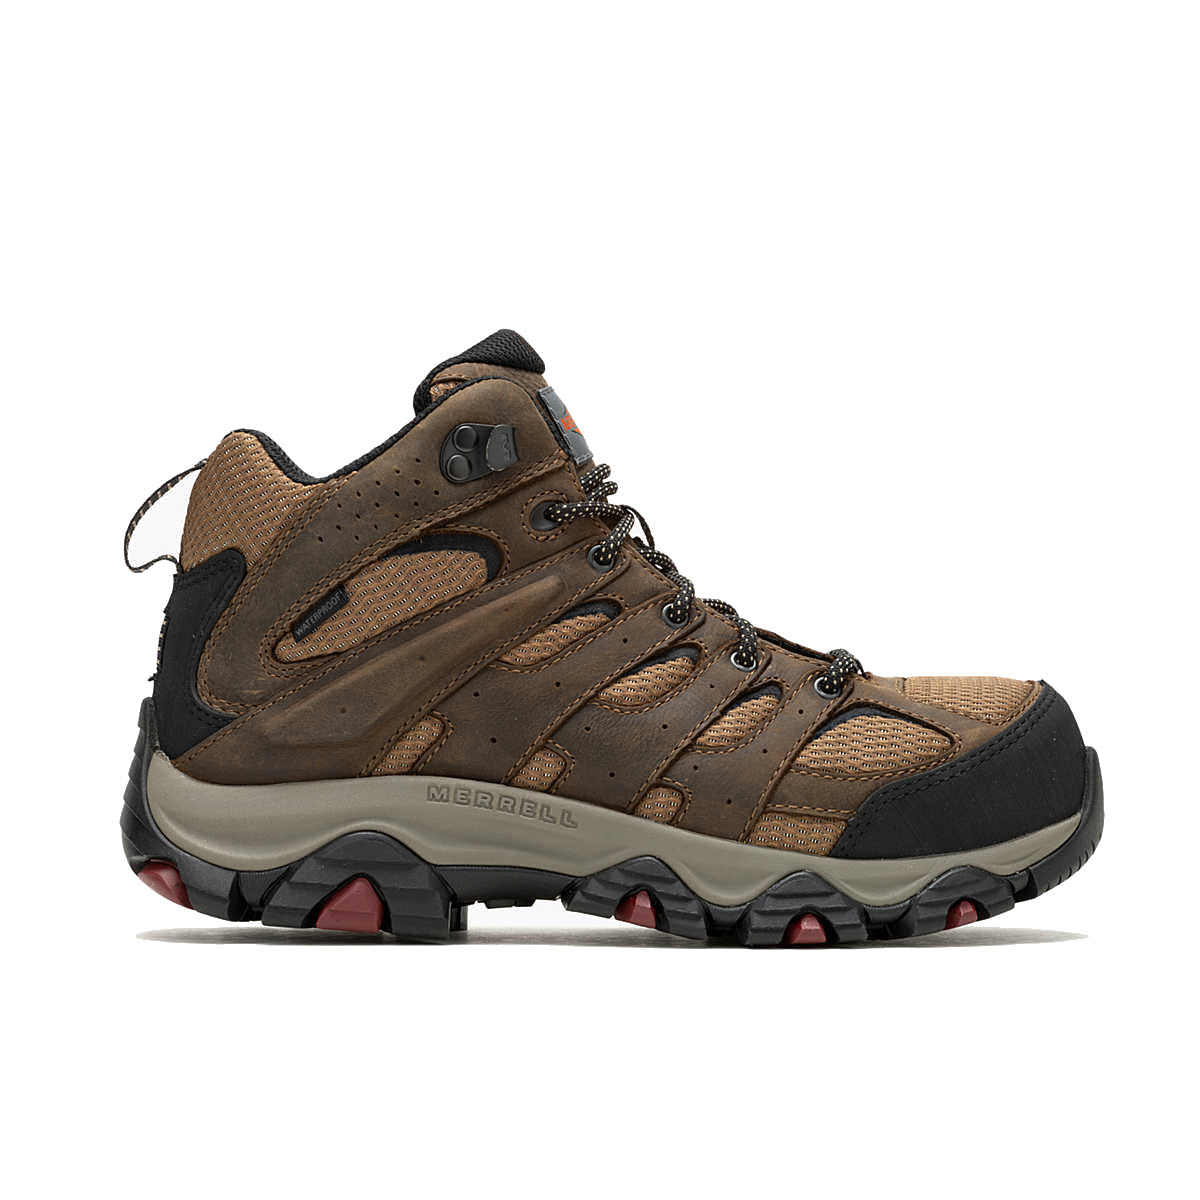 Brown and black Merrell hiking boot, side view, featuring prominent stitching and a rugged, heat-resistant outsole.